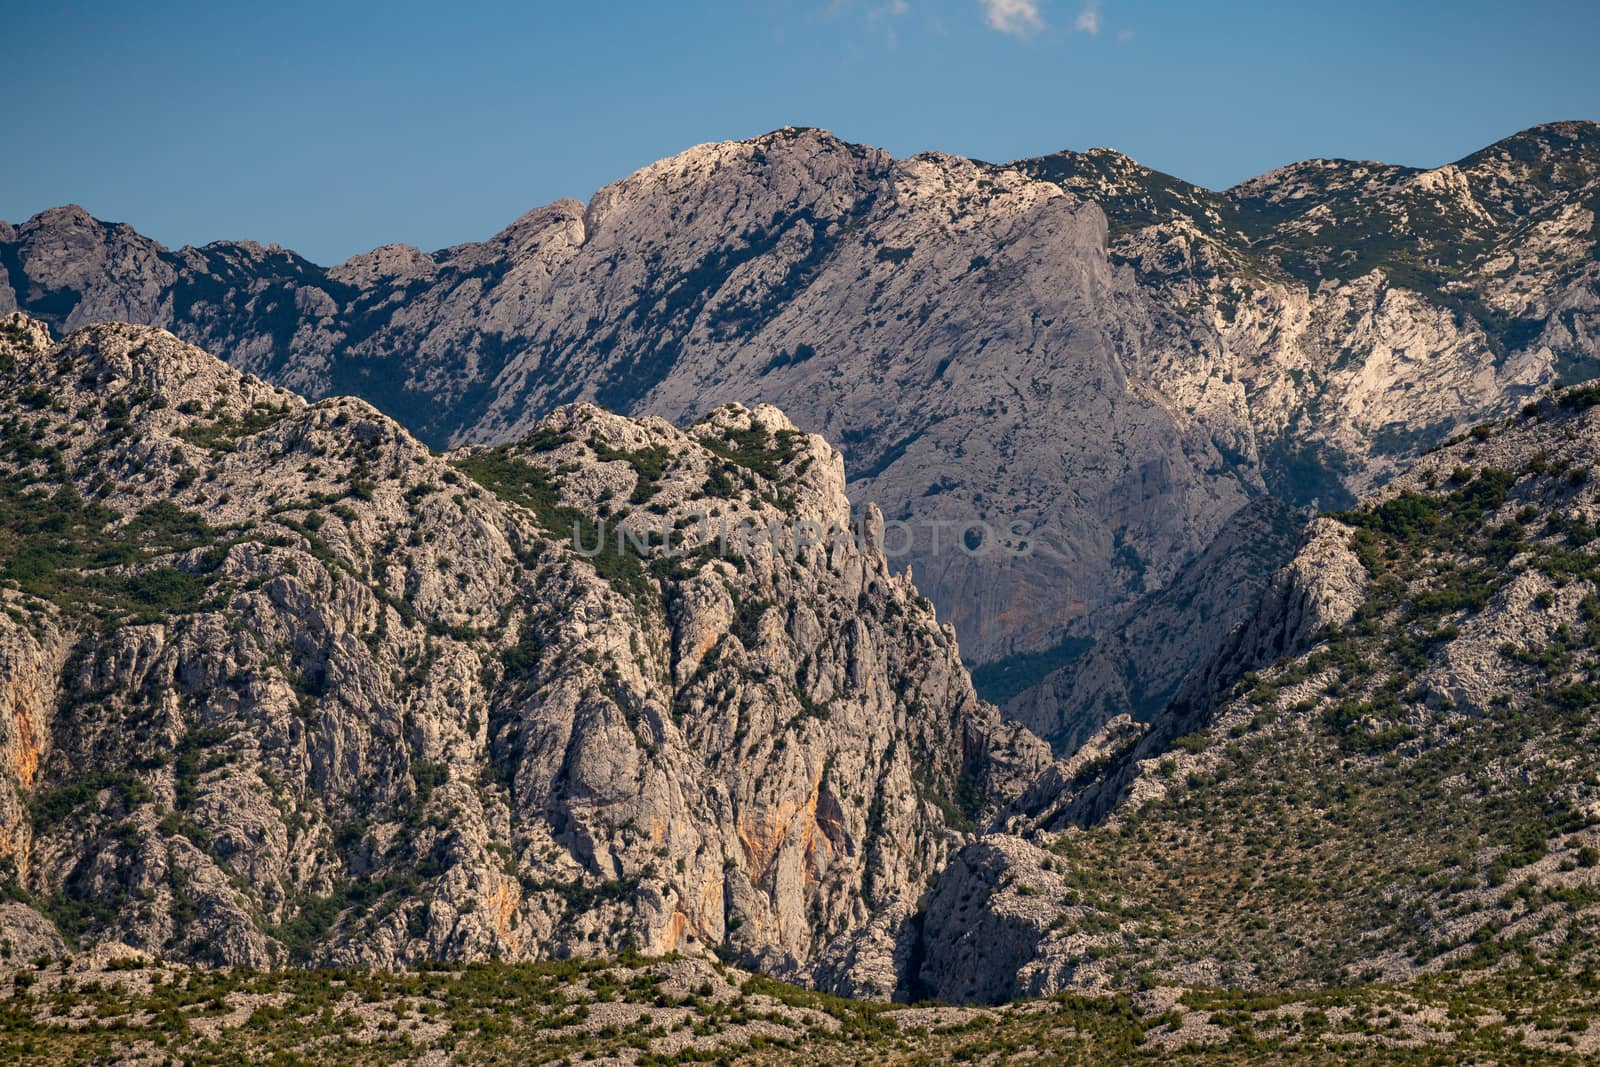 Extreme mountains in Paklenica National Park, Velebit, Croatia by asafaric